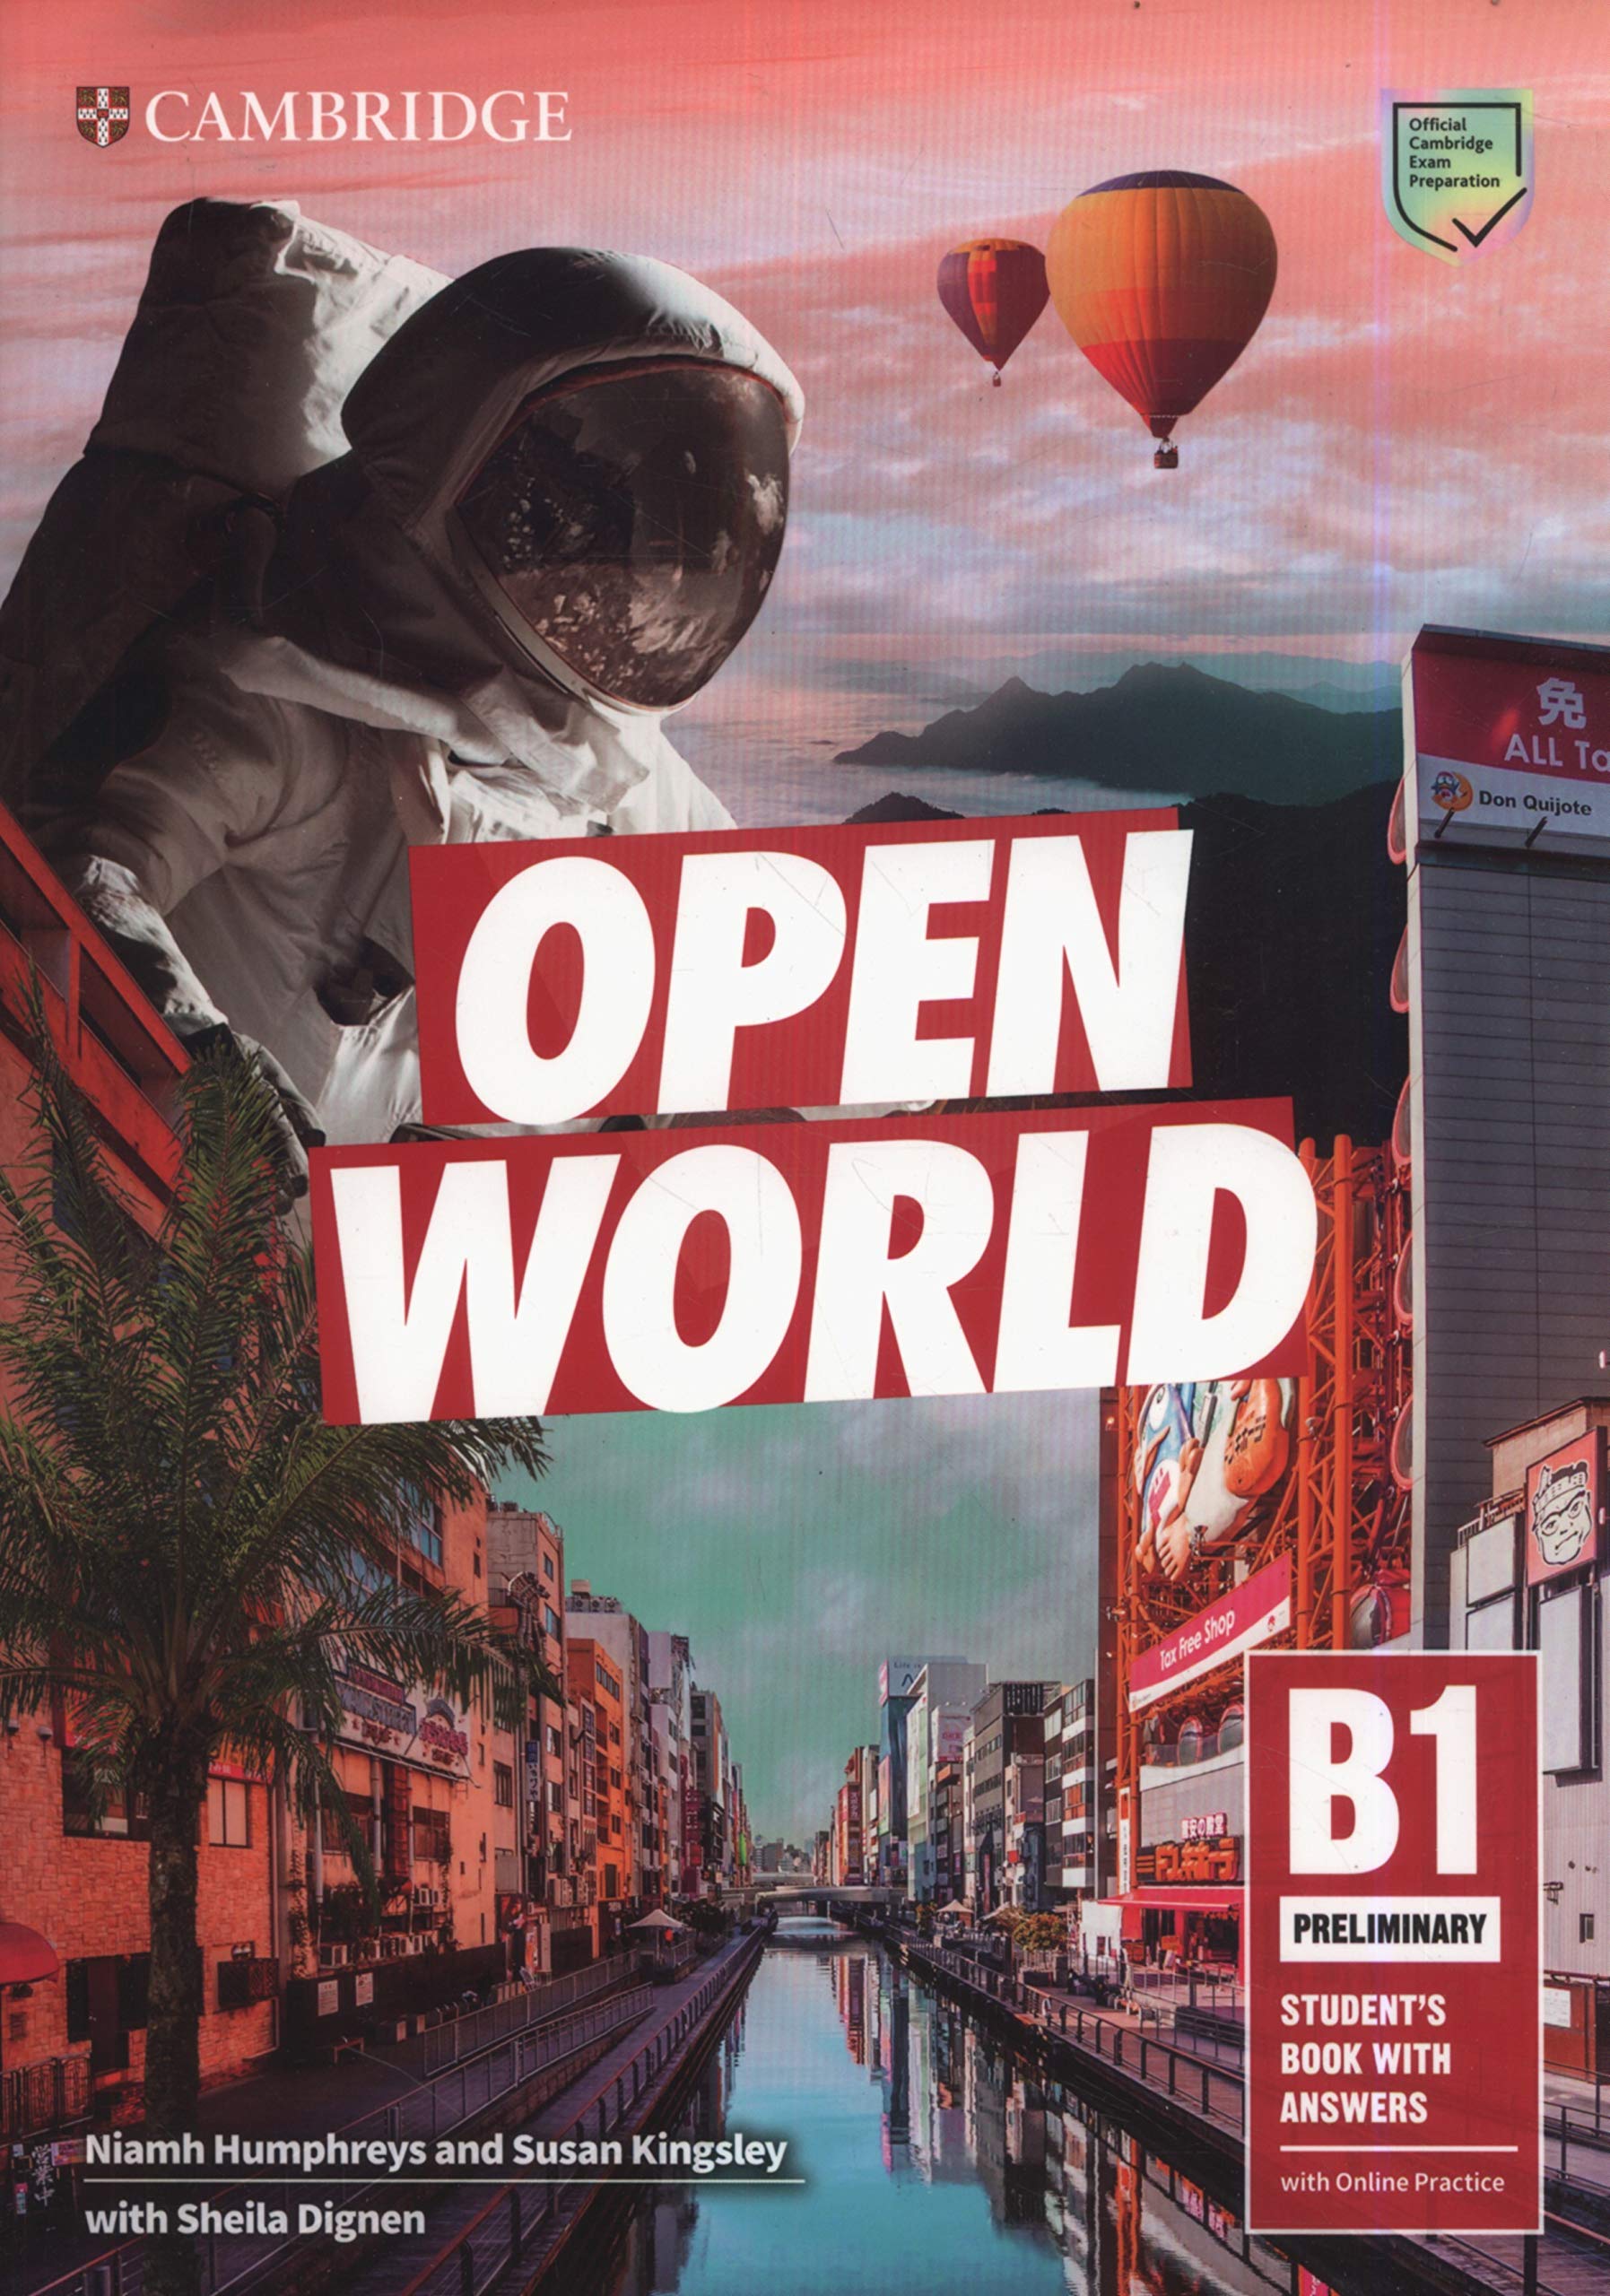 OPEN WORLD PRELIMINARY Student's Book with Answers + Online Practice